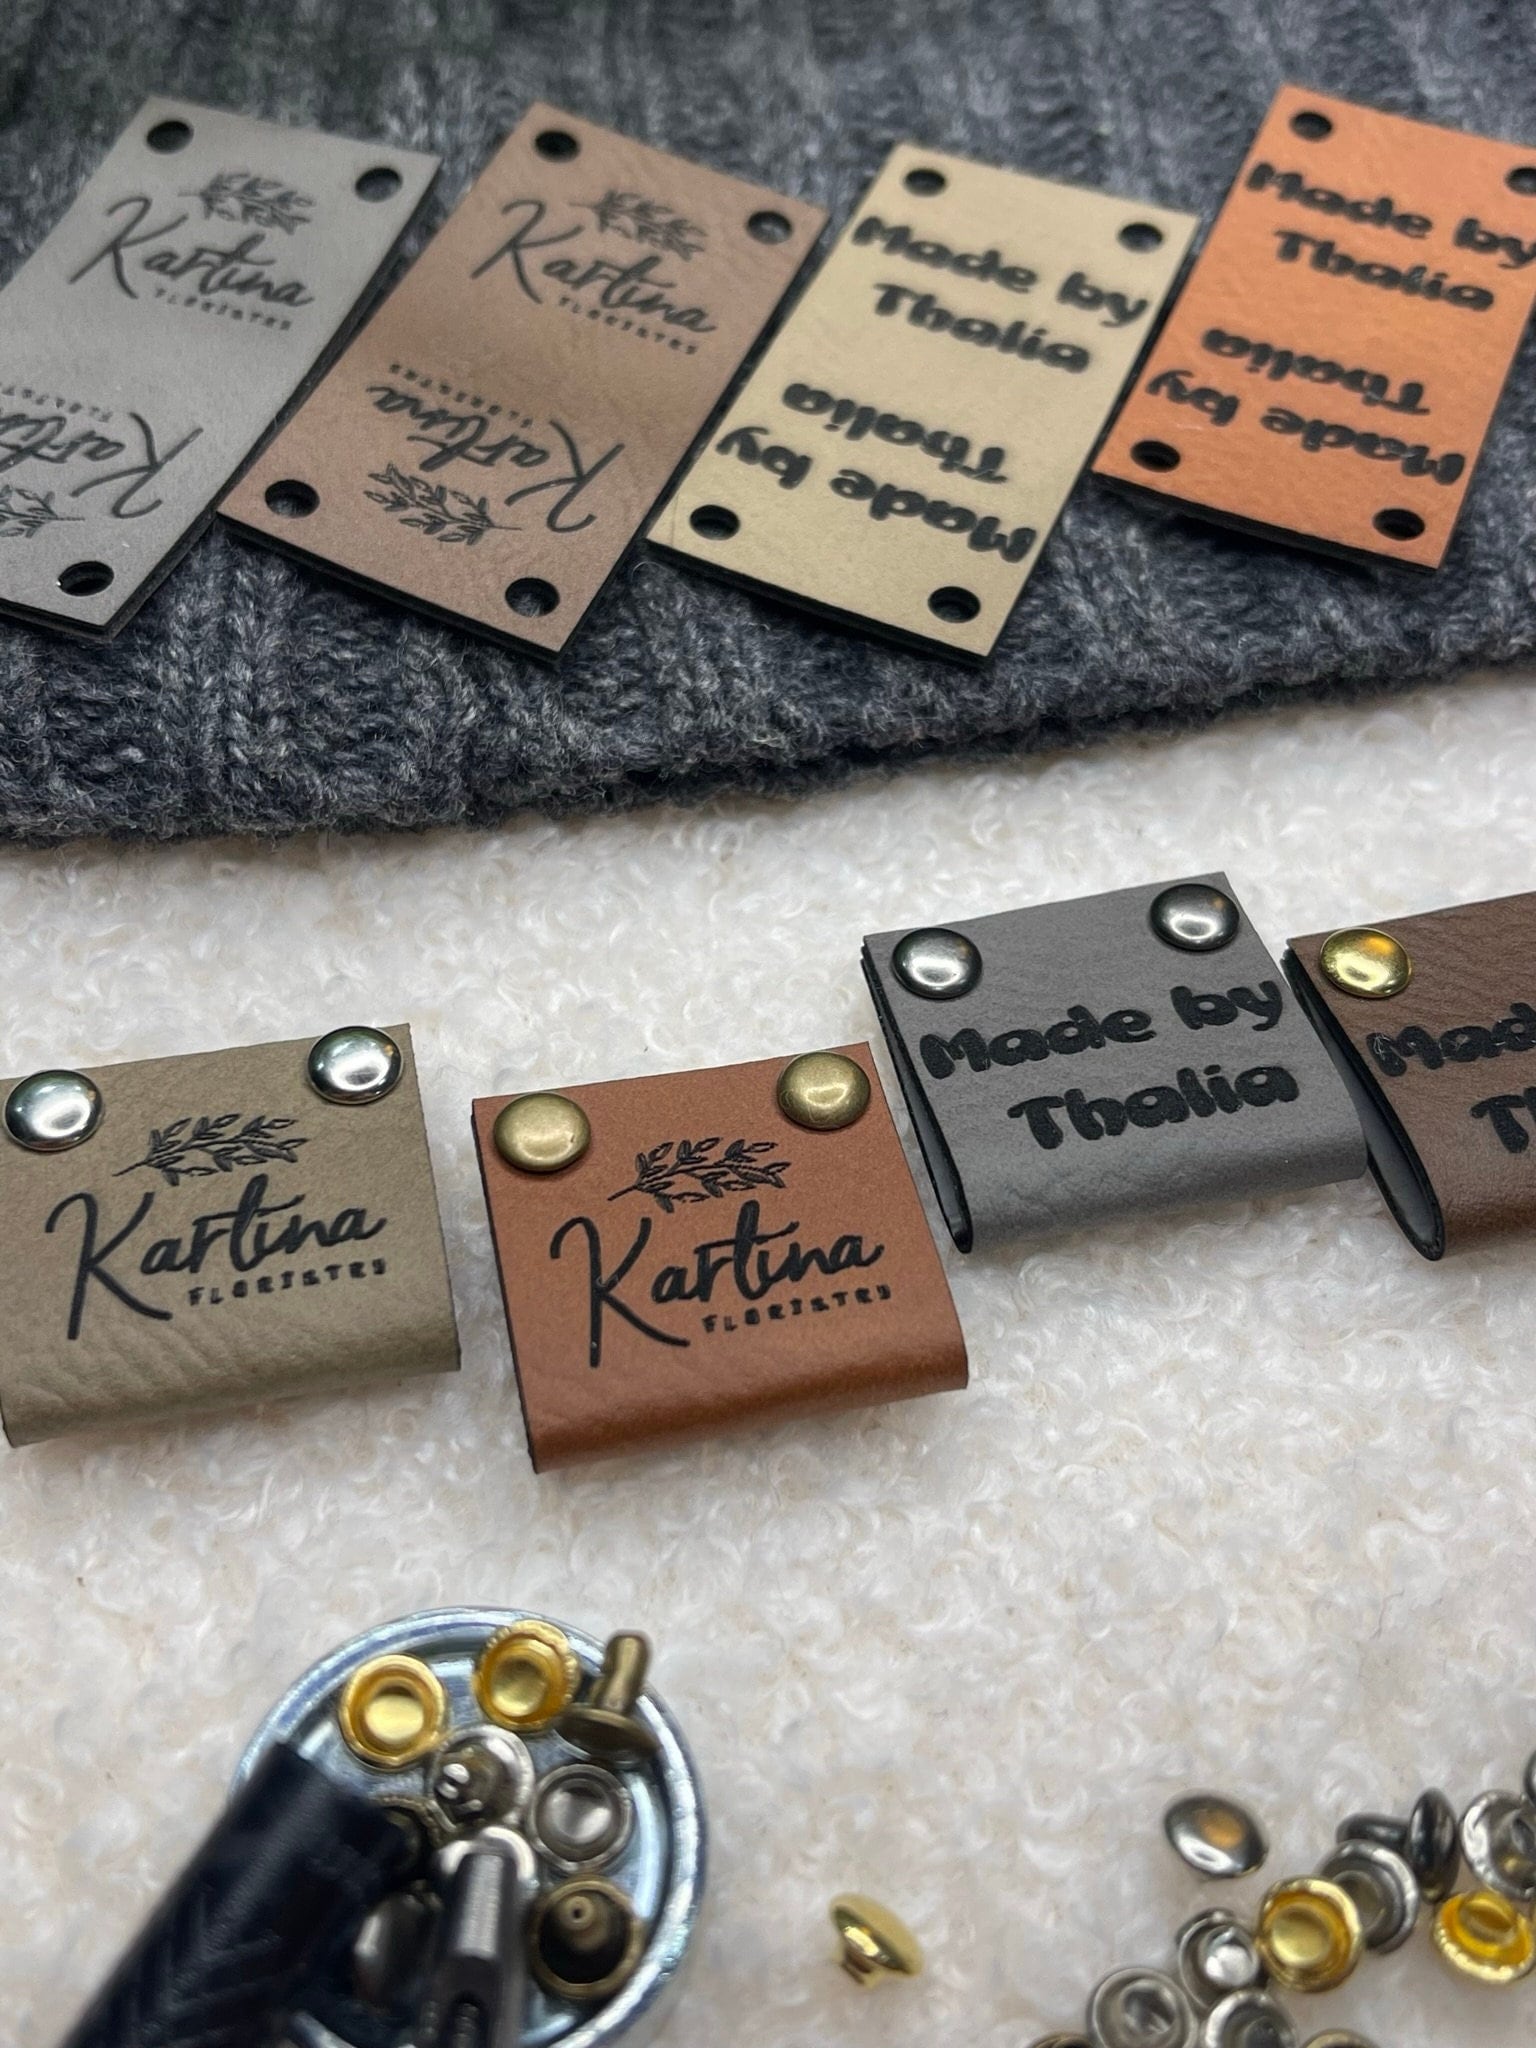 Tags for Crochet 2.5x1 Inches With Rivet Snaps Personalized With Custom  Logo or Text for Knits, Crochet and Handmade Brands 